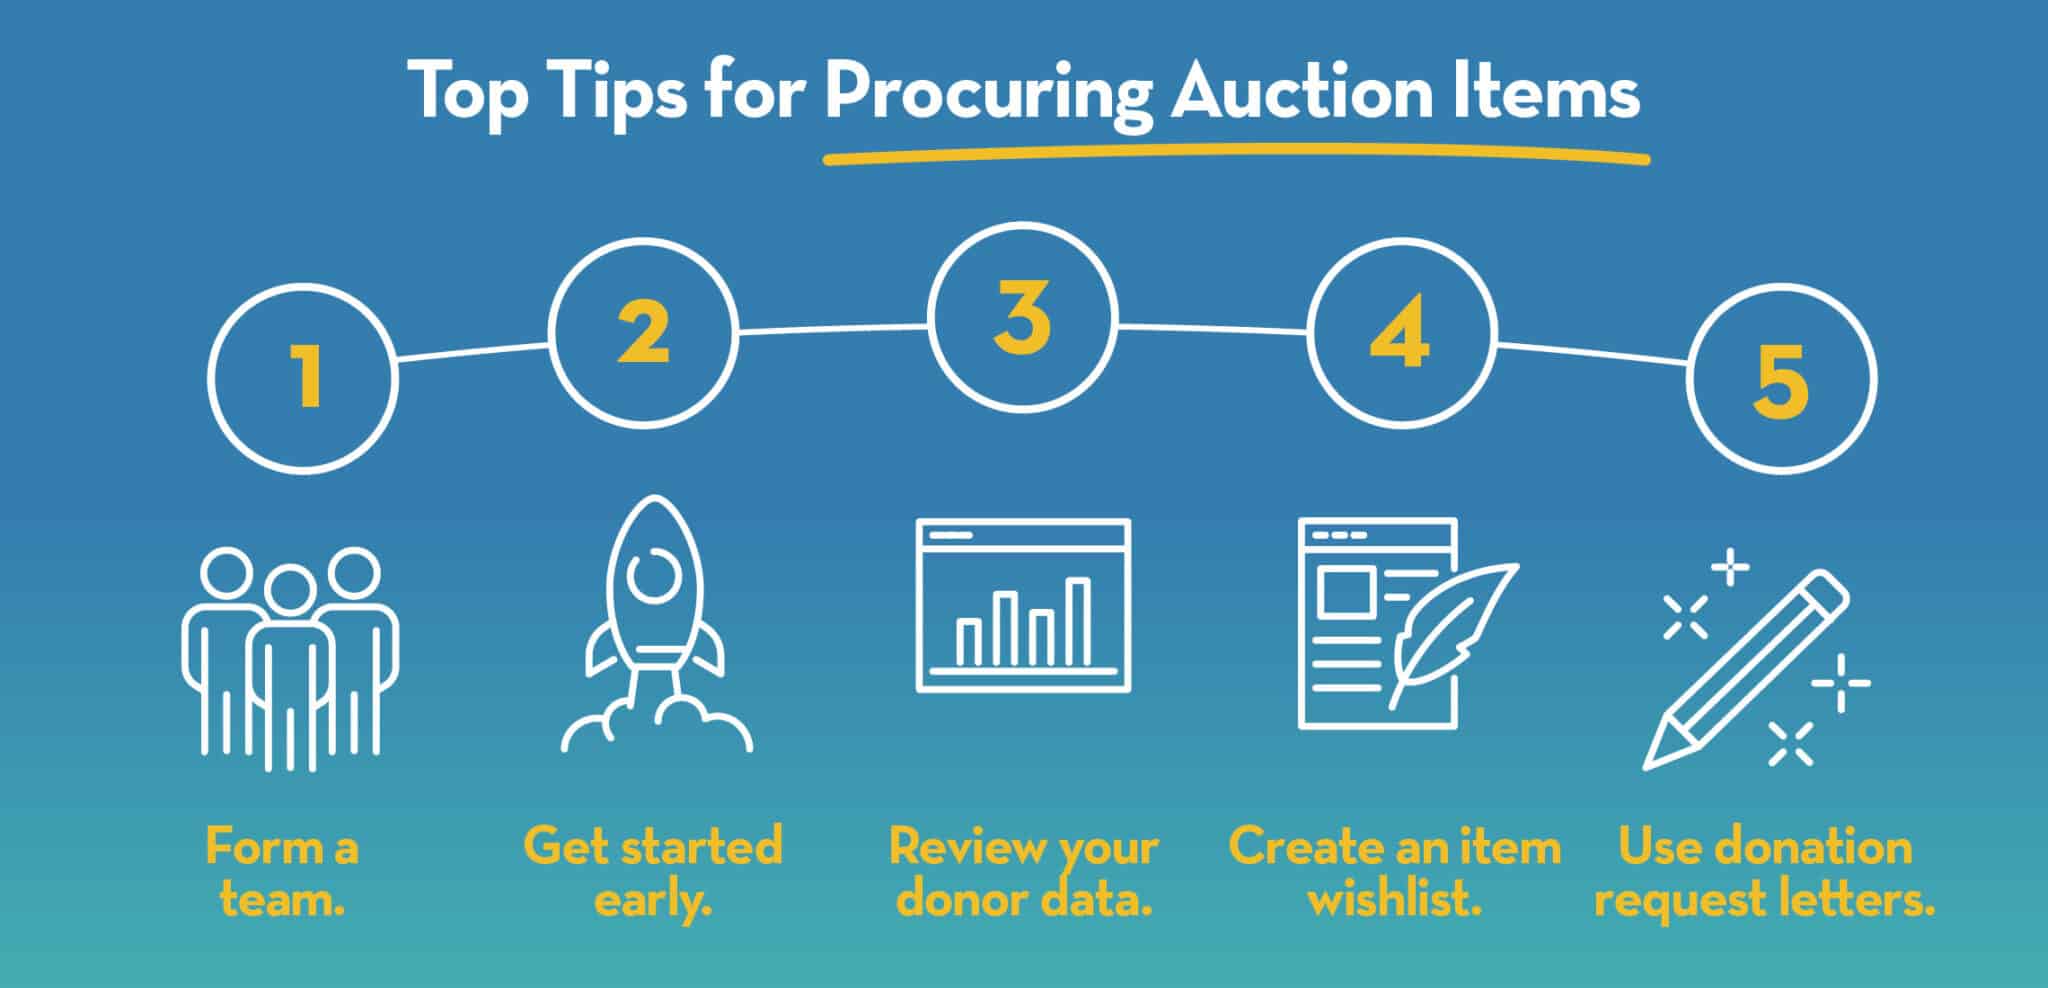 Top tips for procuring auction items